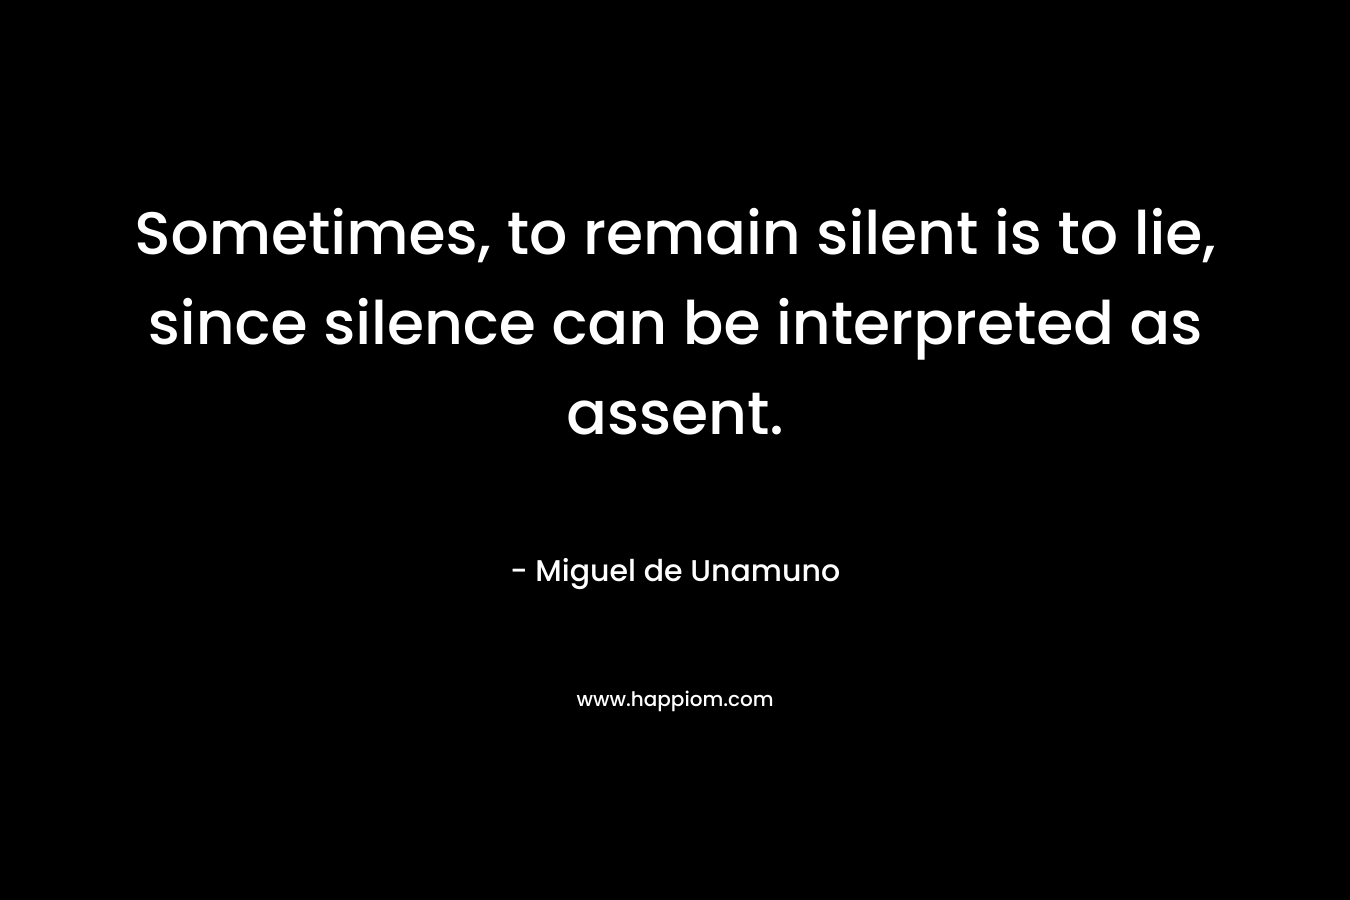 Sometimes, to remain silent is to lie, since silence can be interpreted as assent.